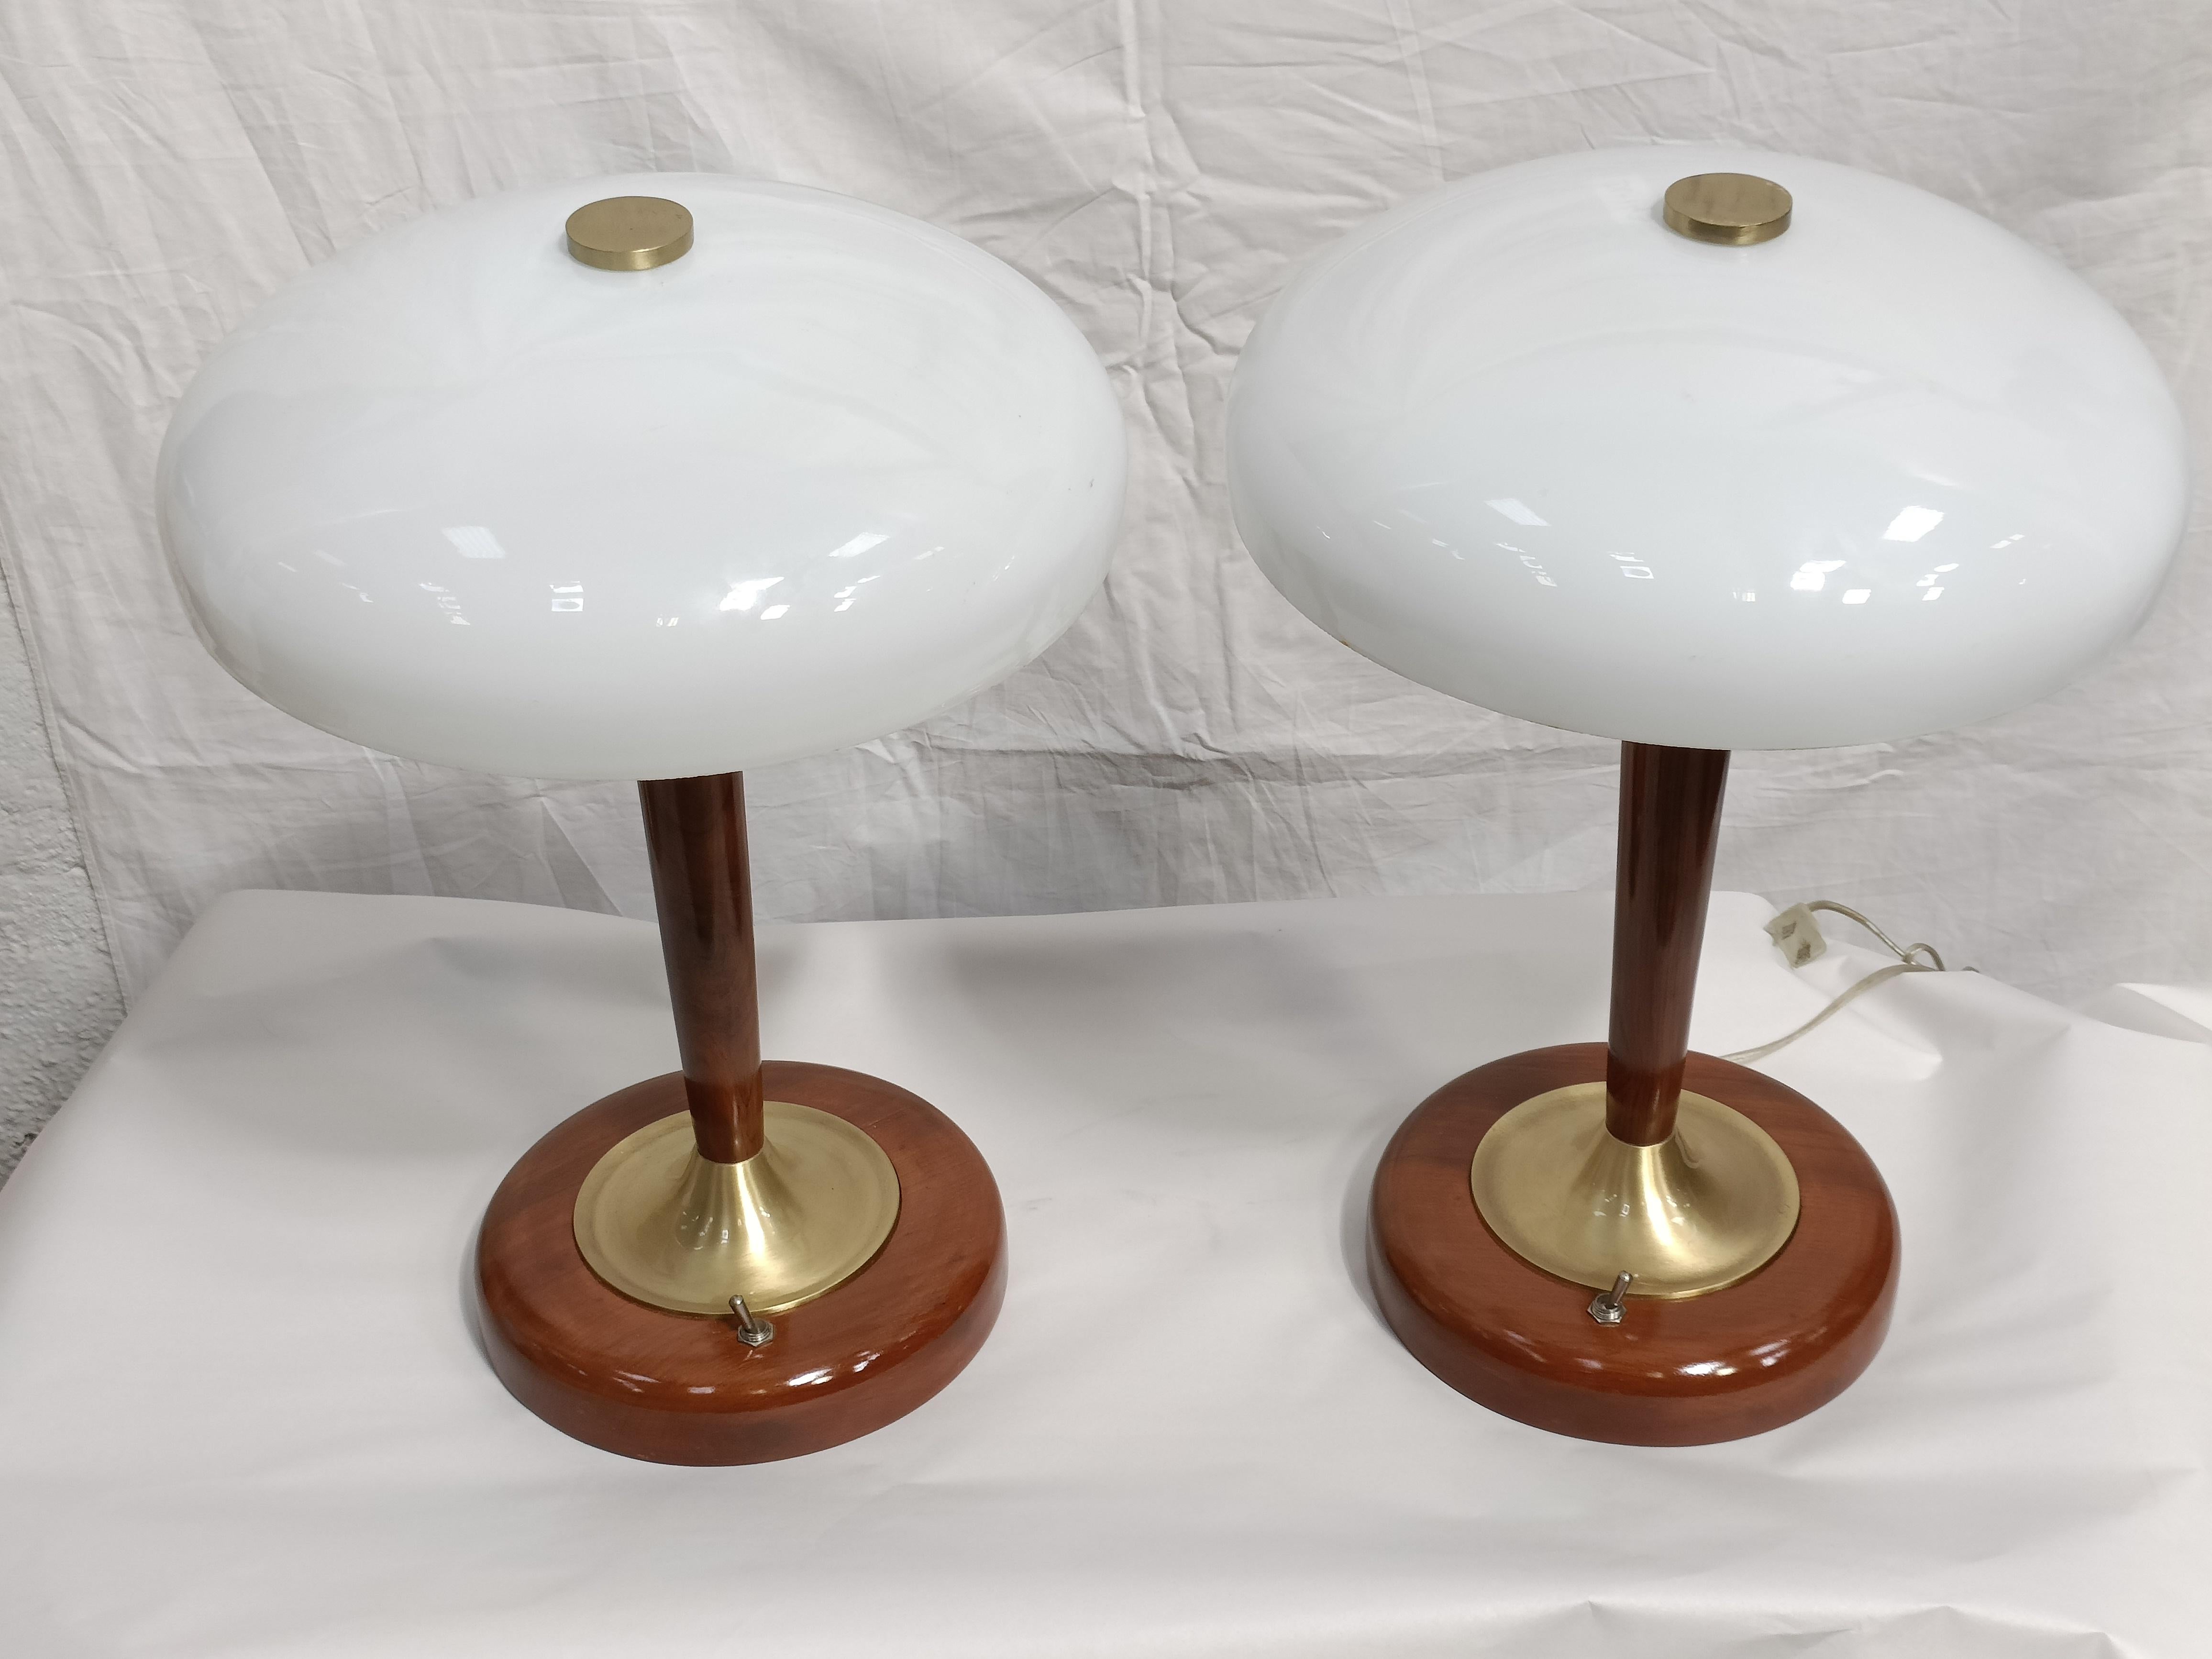 A pair of Mid-Century Modern table lamps with teak and brass stem and base and round, frosted dome shades.  Takes three standard base light bulbs, electrified for American use.  Base itself has an 8.5